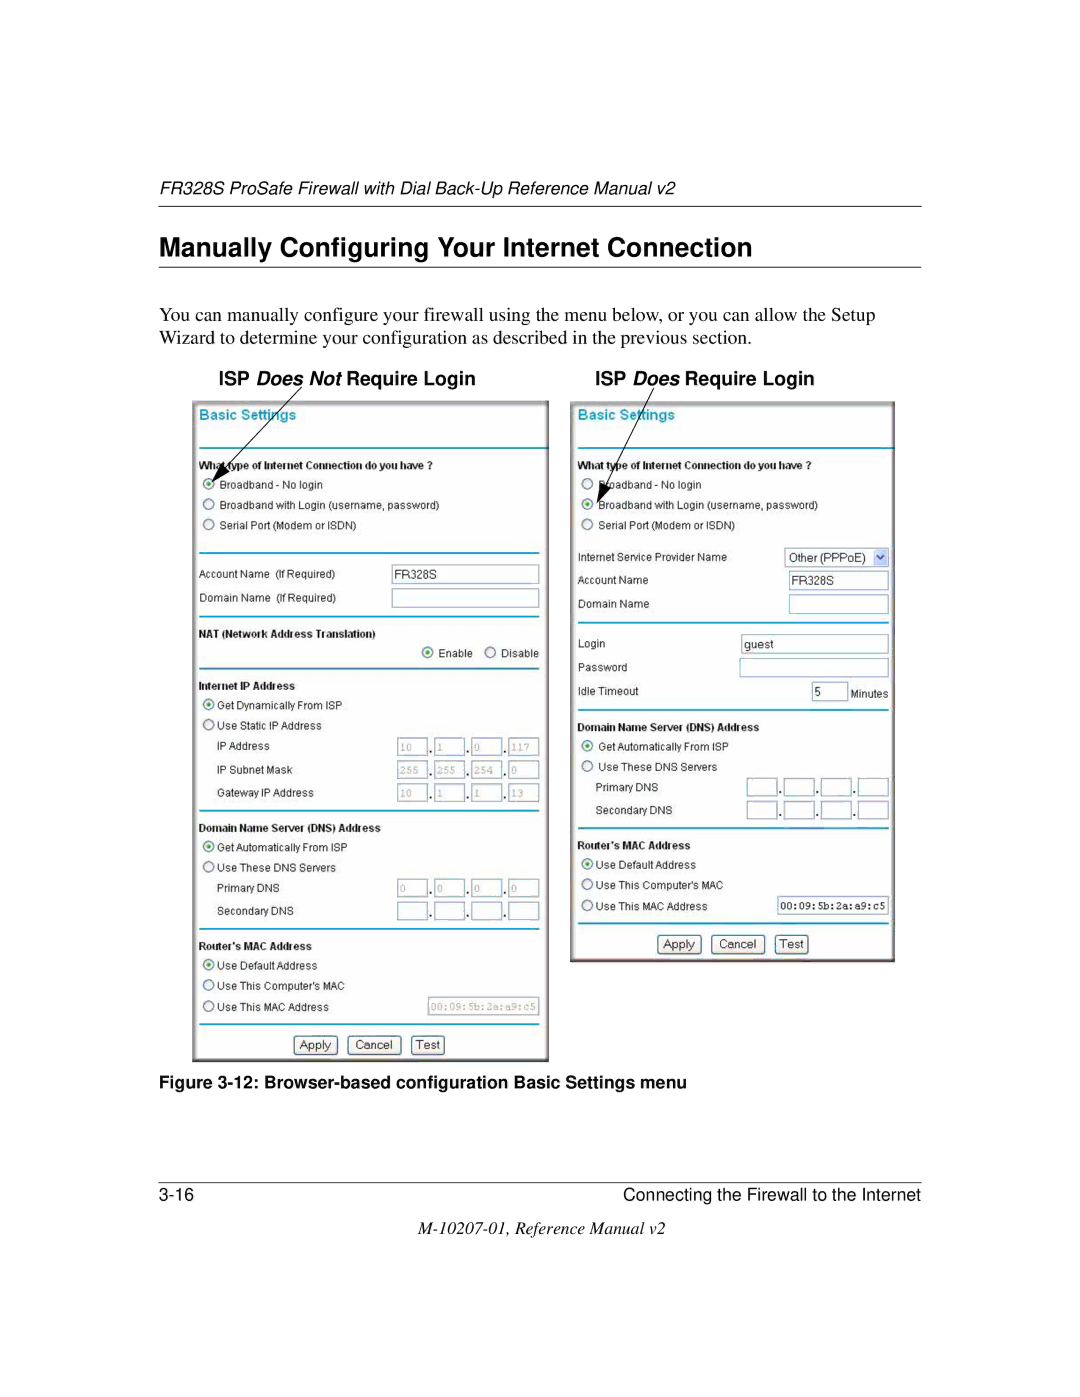 NETGEAR FR328S manual Manually Configuring Your Internet Connection, ISP Does Not Require Login 